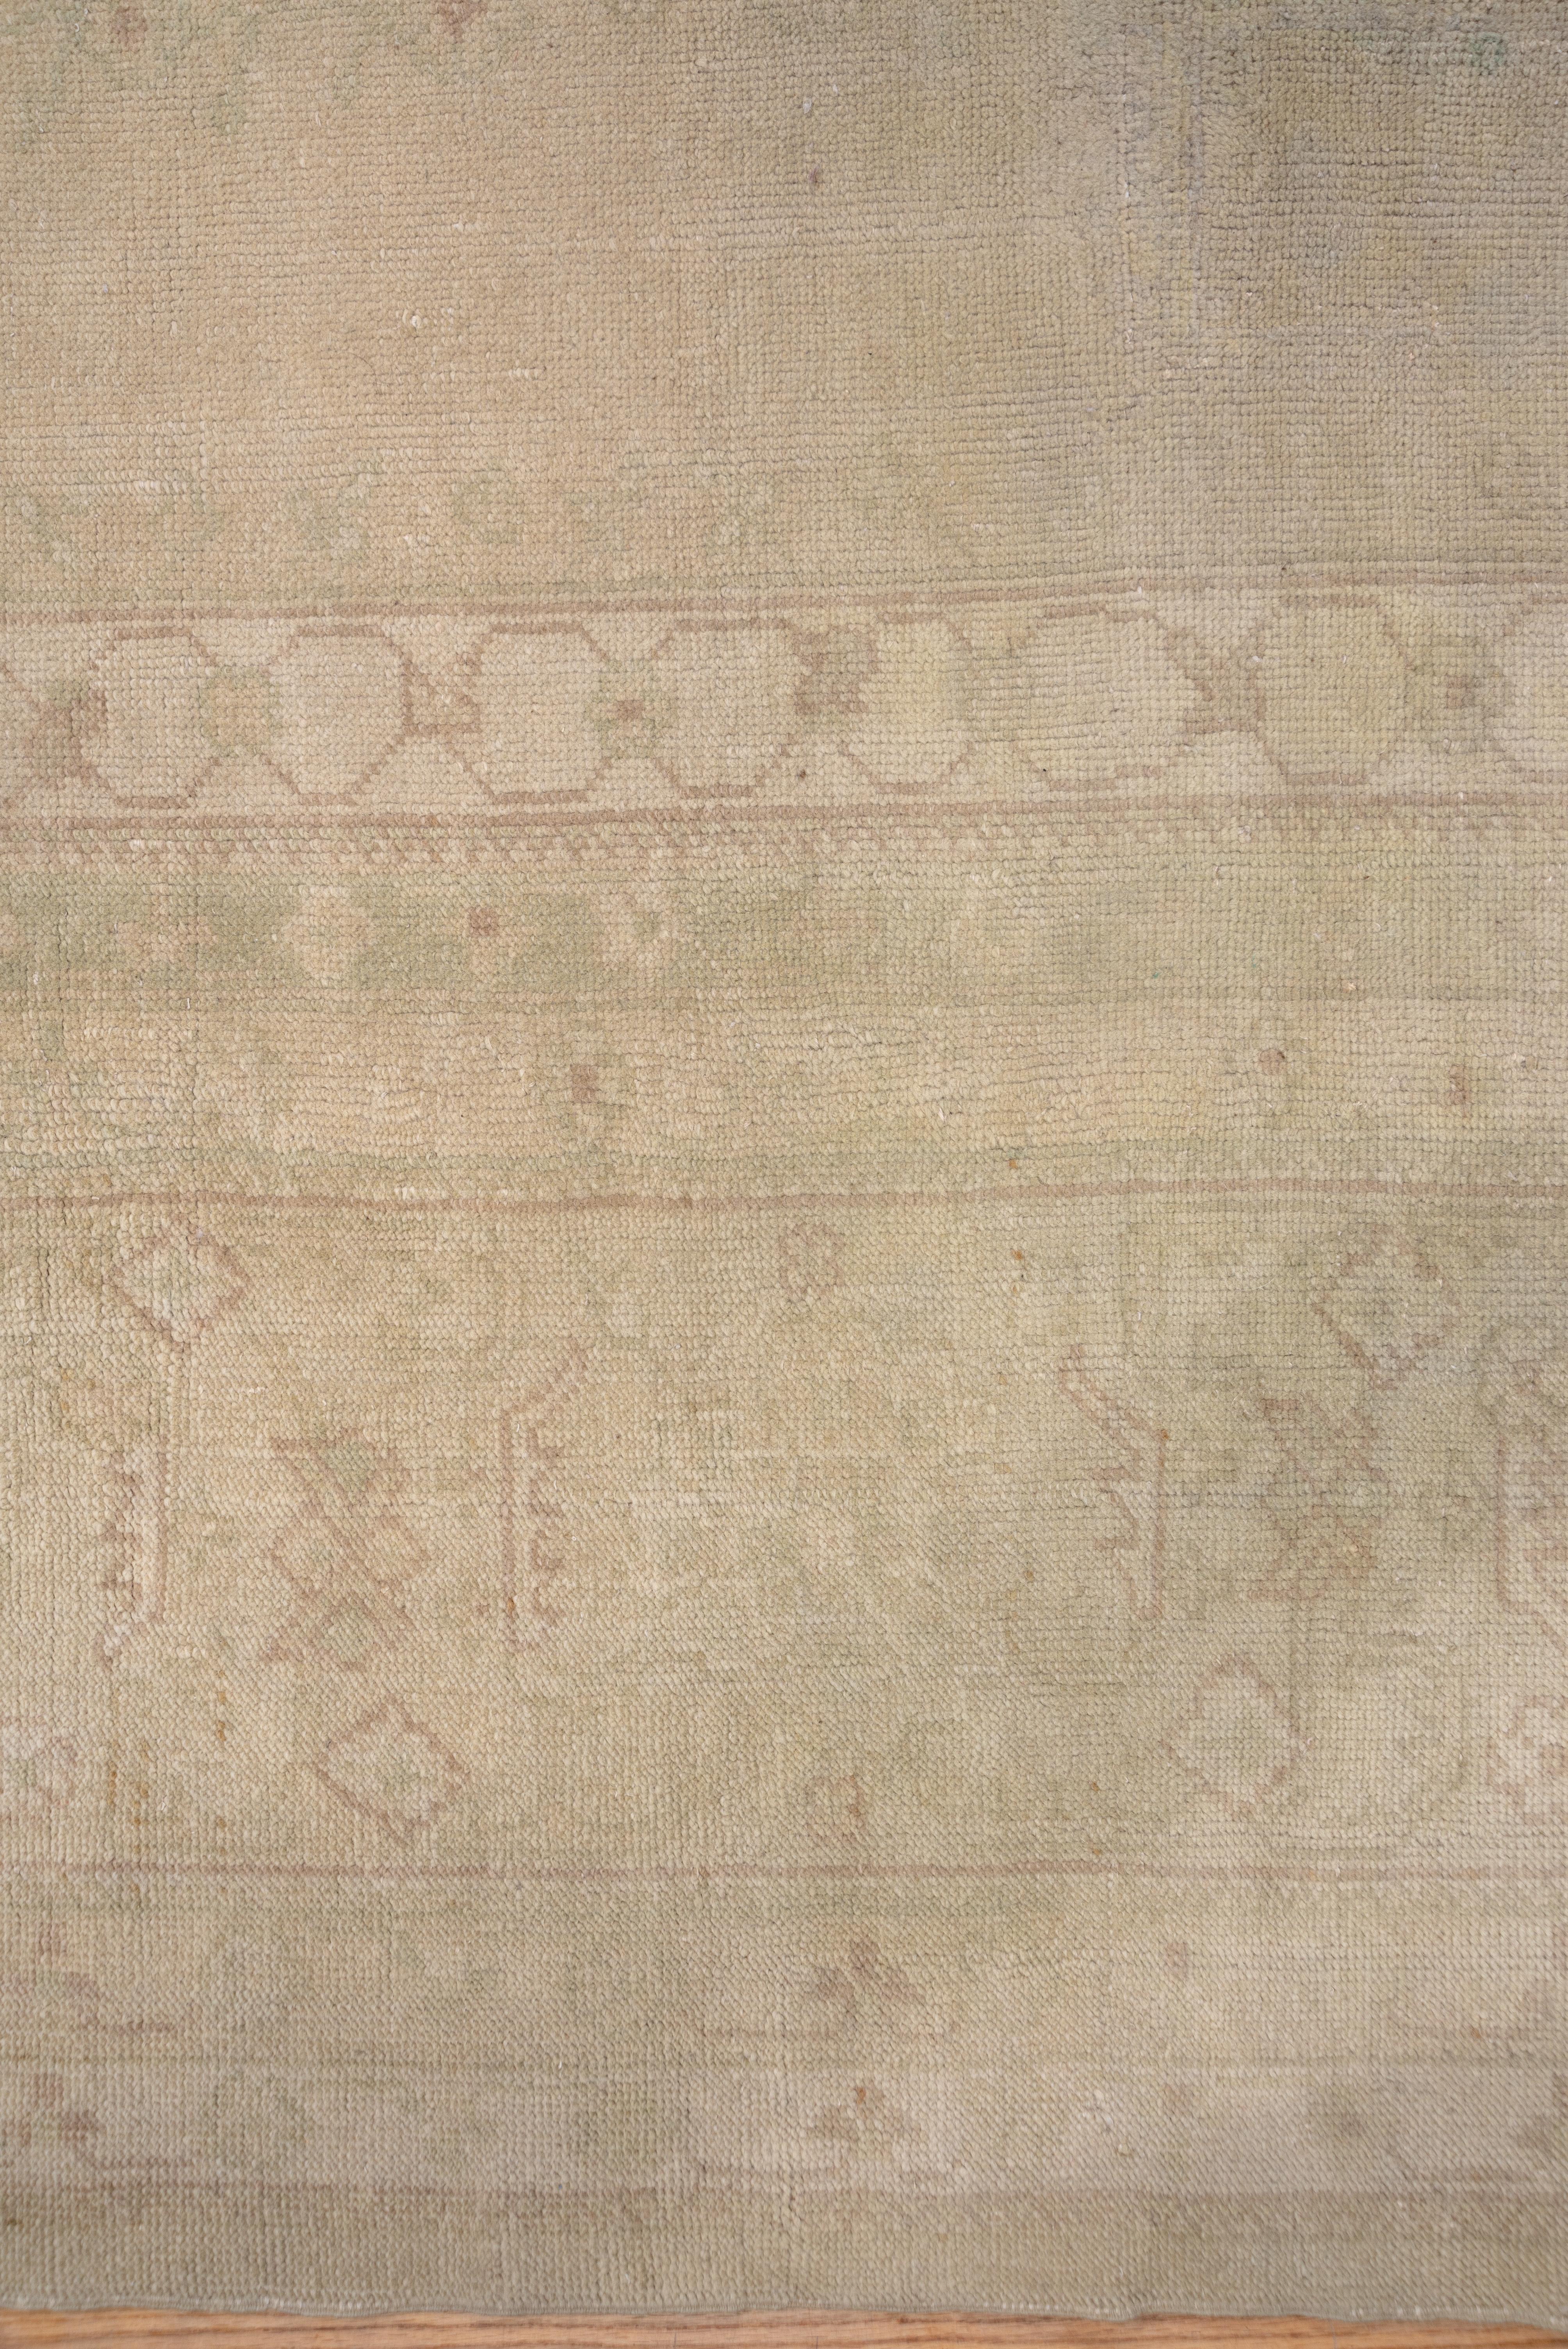 Hand-Knotted Ivory Antique Oushak Carpet